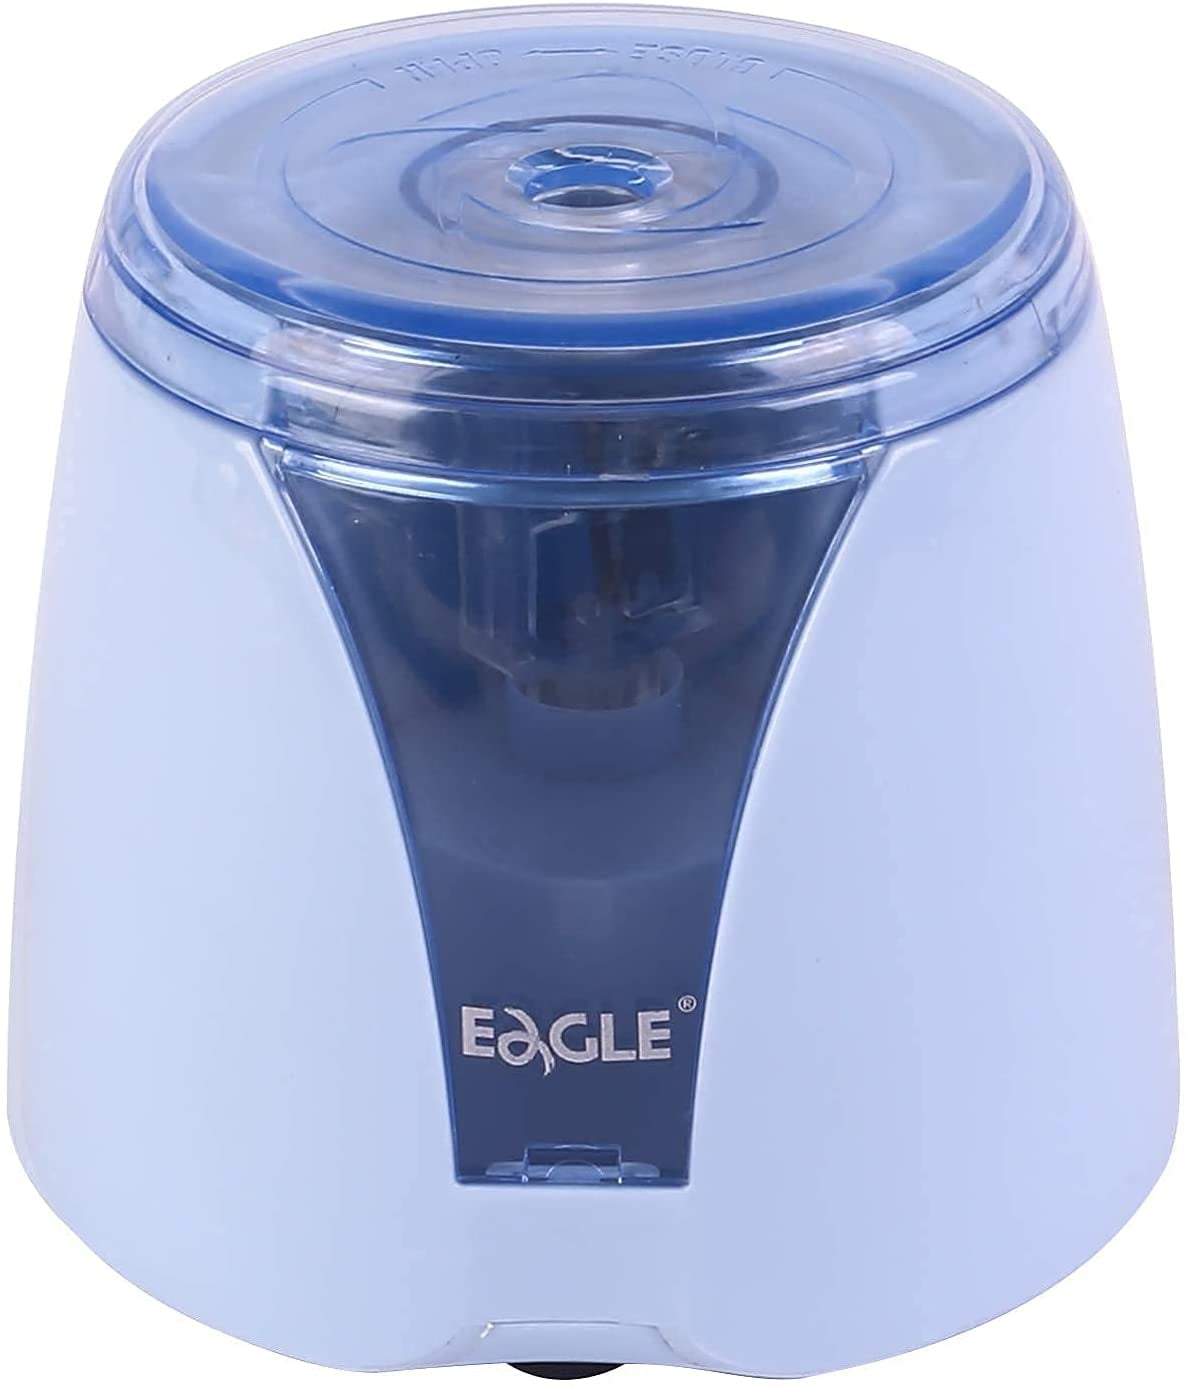 Portable Eagle Electric Pencil Sharpener Suitable for Kids School and Office use,Black Large Shaving Holders Reusable and Replaceable Blade Battery Powered Carbon Steel Blades Home 